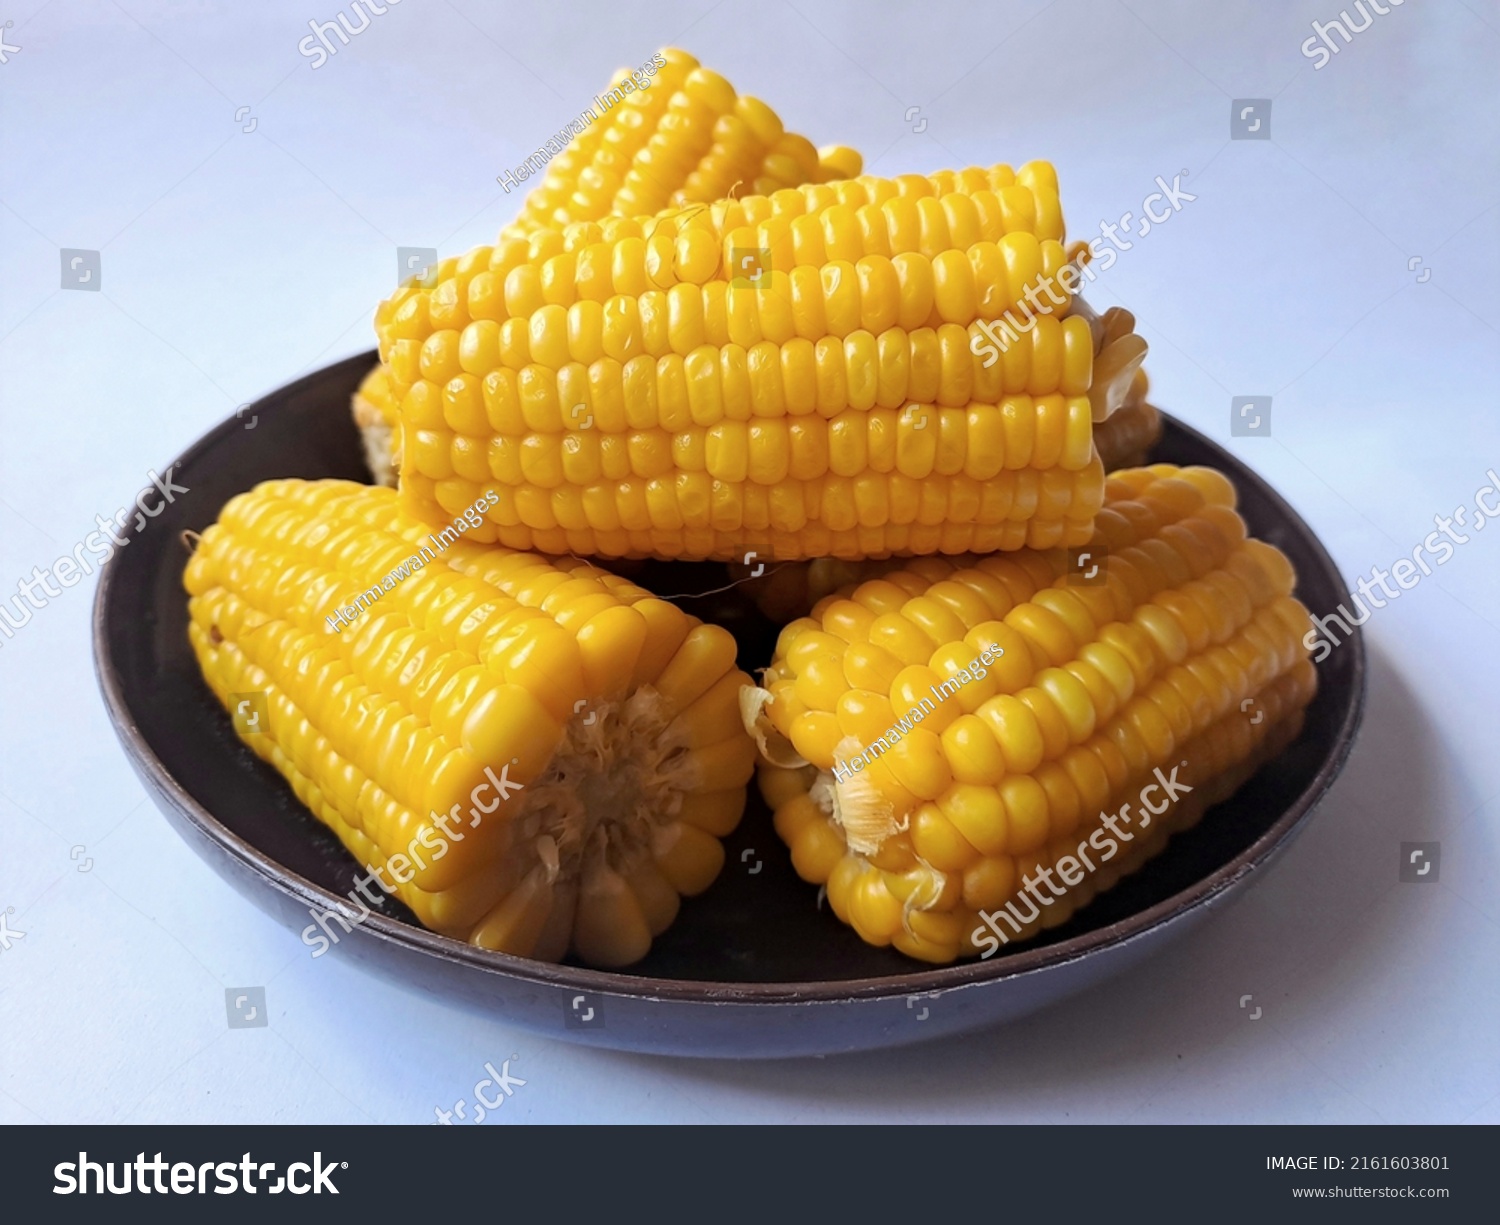 Boiled sweet corn is a snack when gathering with family or friends. It tastes delicious, healthy and nutritious. #2161603801